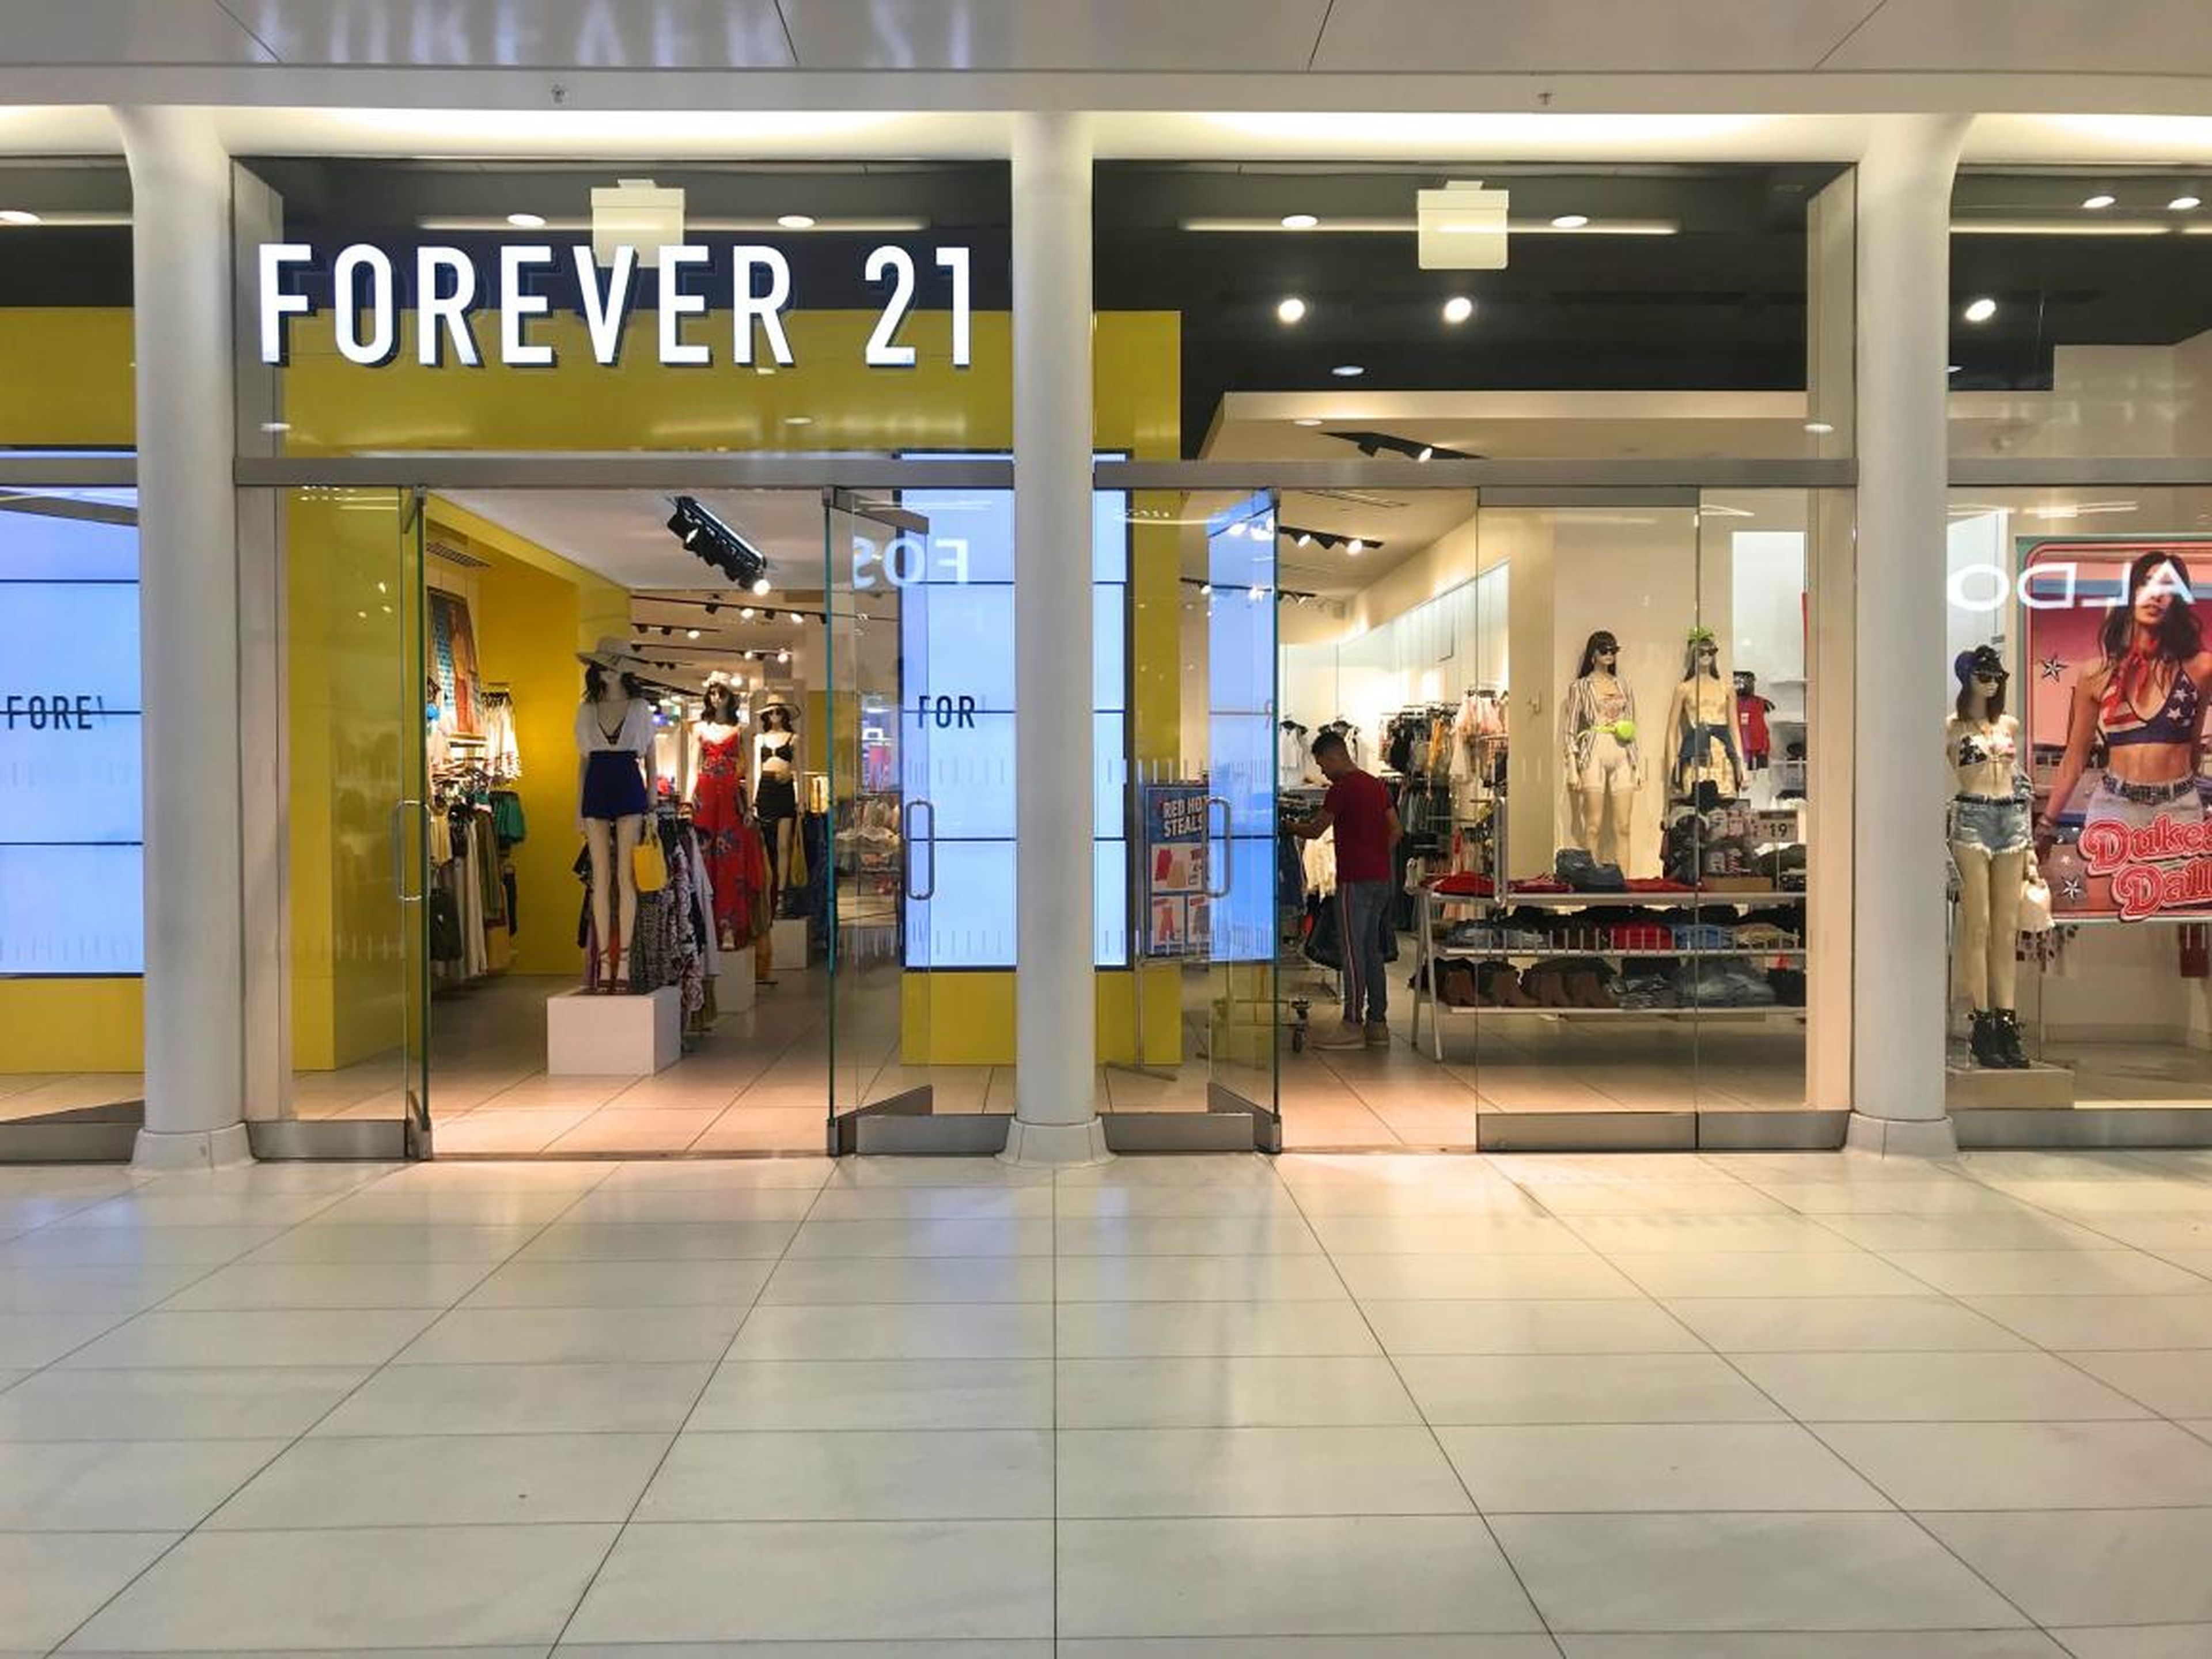 Next, we took the escalator down to the lower level to visit Forever 21...